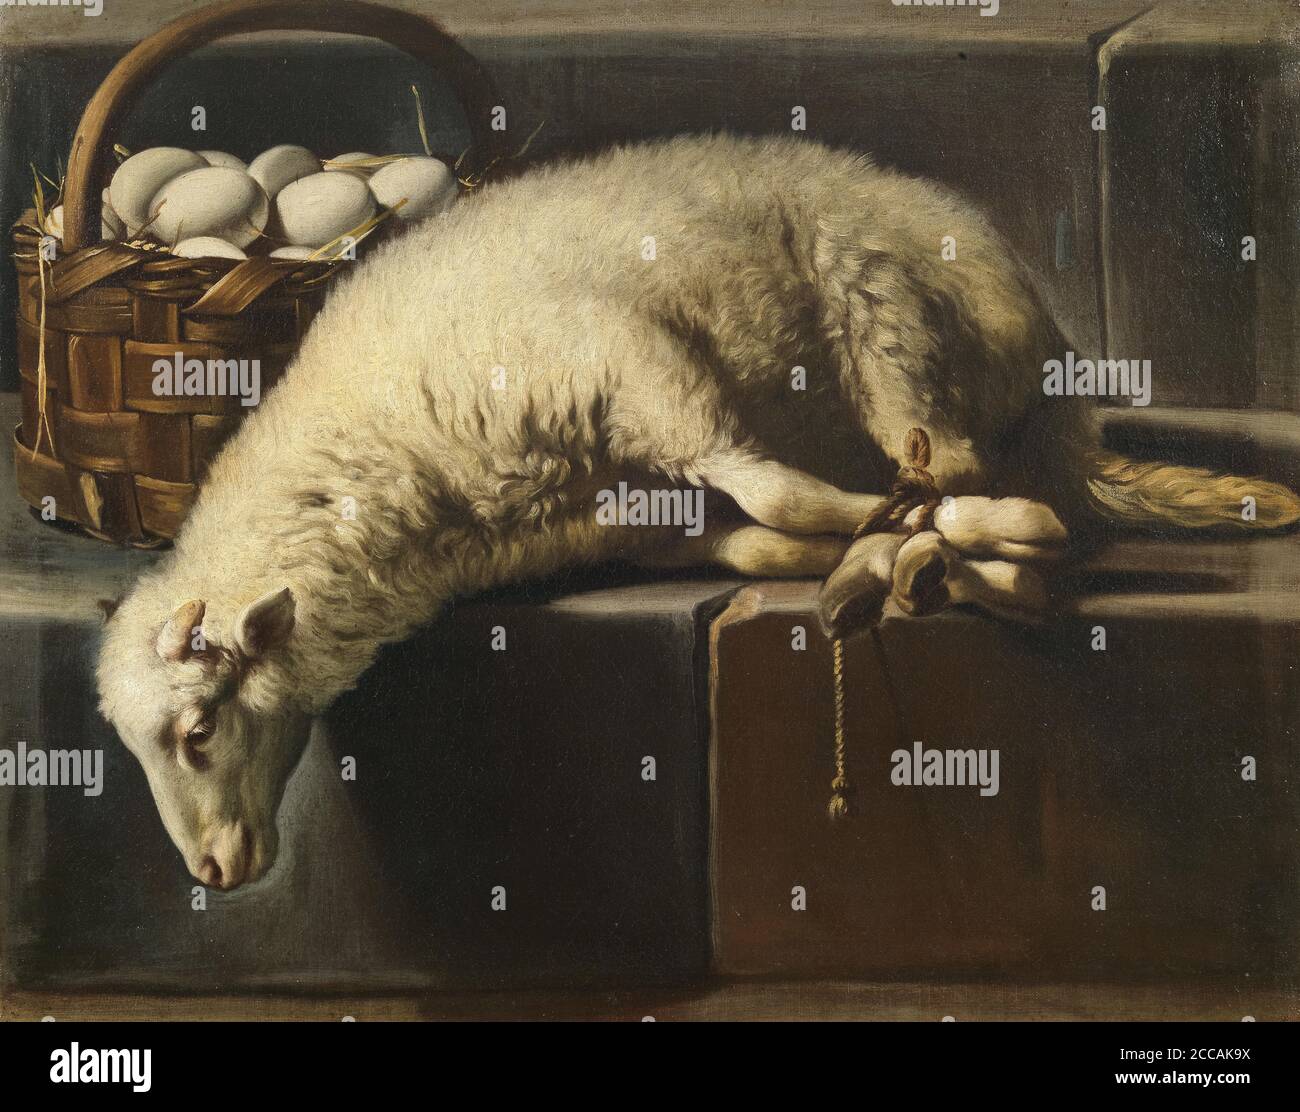 A ligated lamb besides a basket of eggs (Allegory of Easter). Museum: PRIVATE COLLECTION. Author: Giovan Battista Recco. Stock Photo